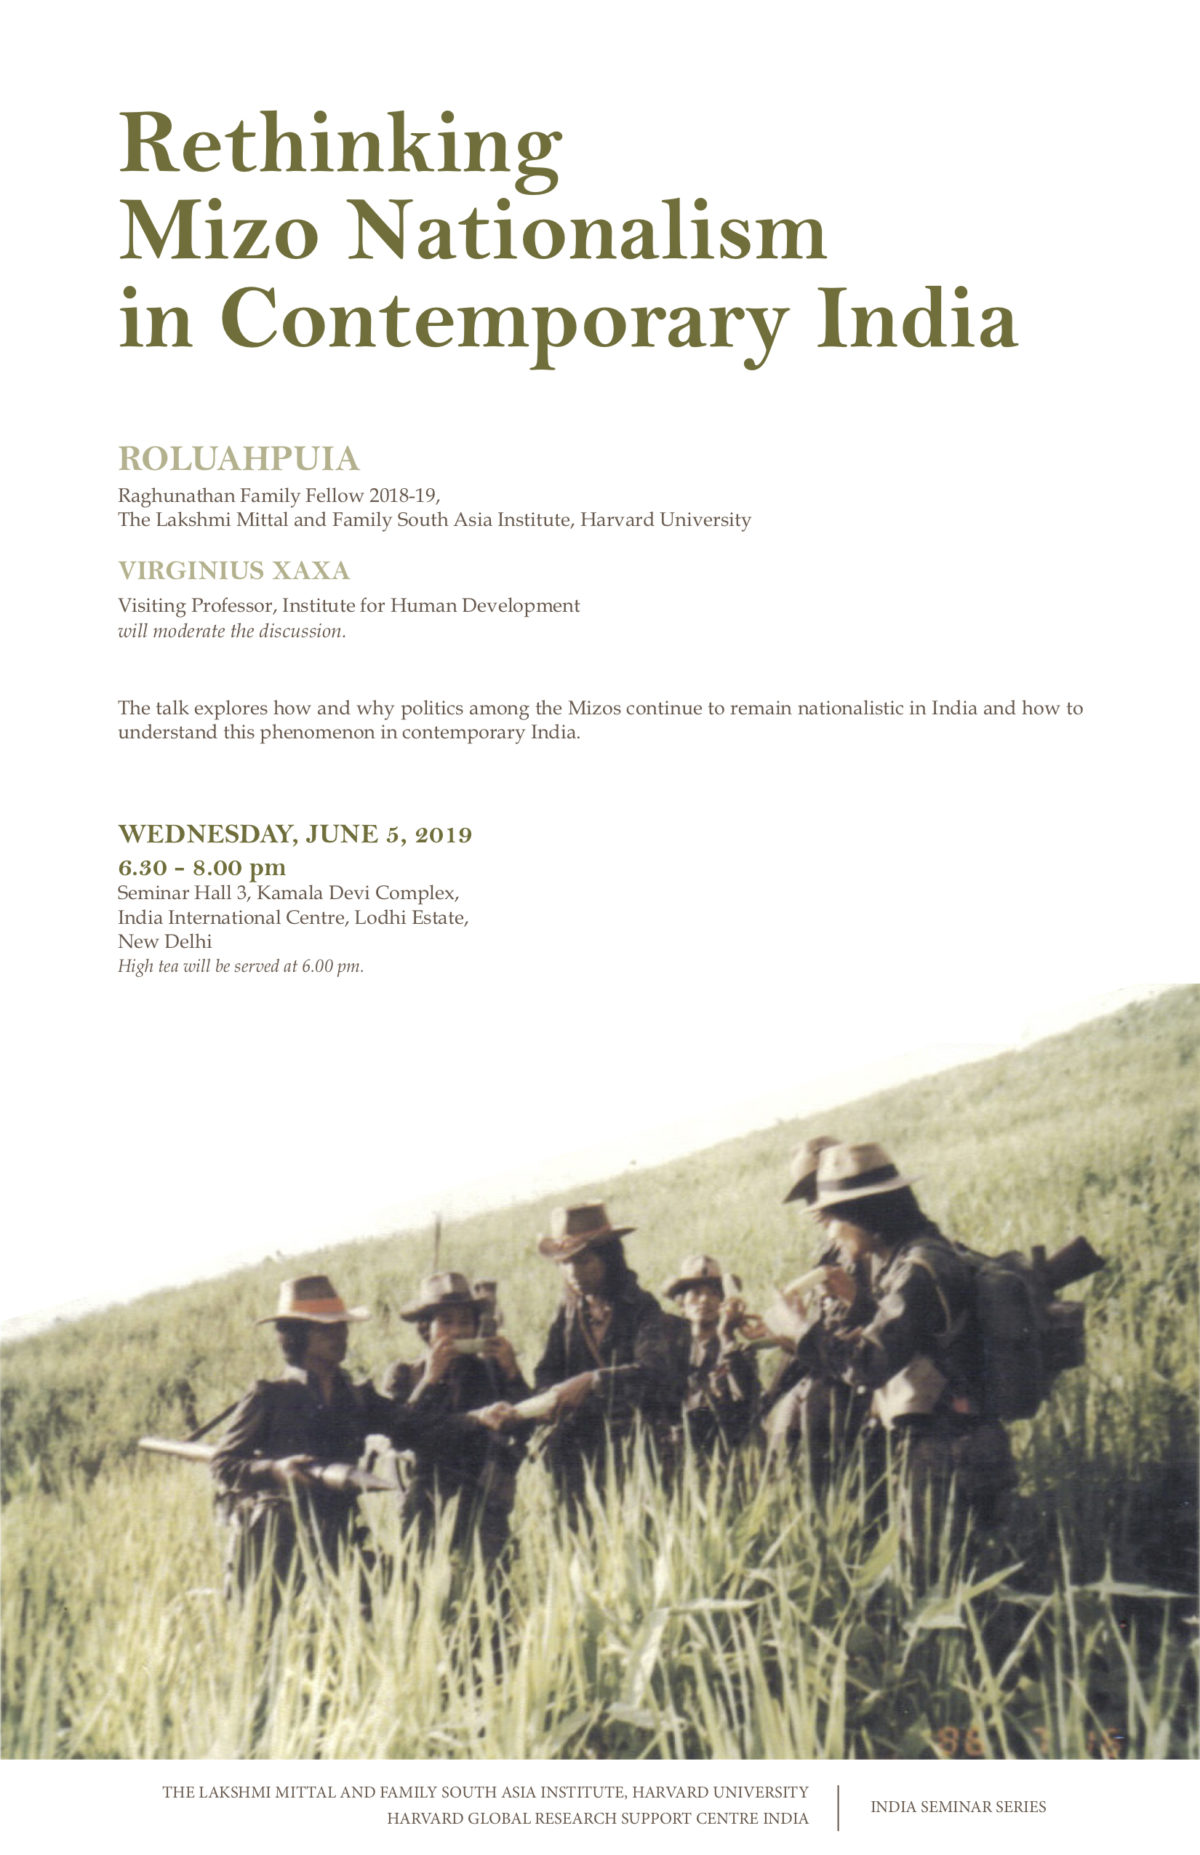 Poster image for Rethinking Mizo Nationalism in Contemporary India event.